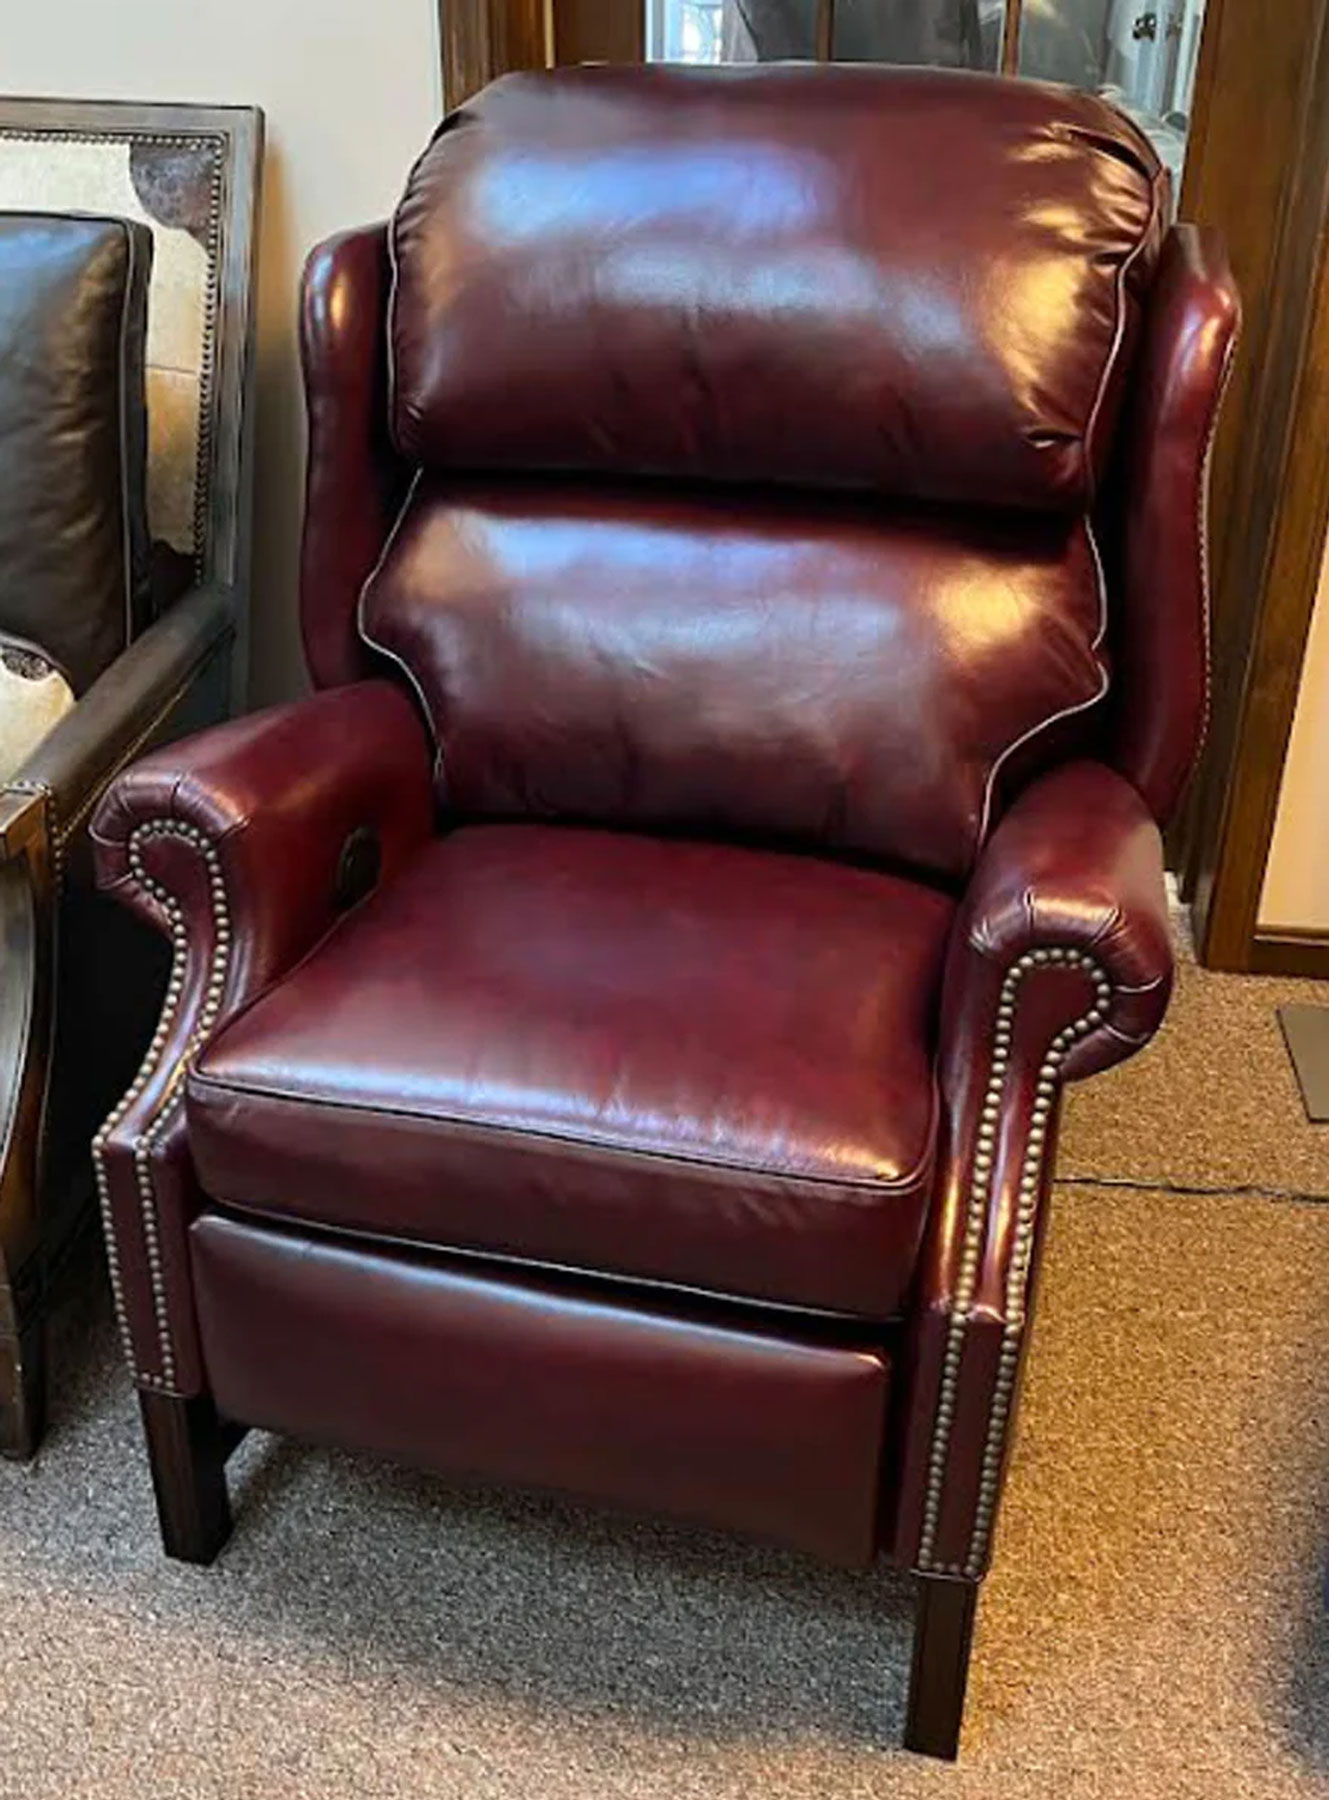 McKinley Leather 51 Odell Chippendale Recliner in Montalban Rosefinch Leather